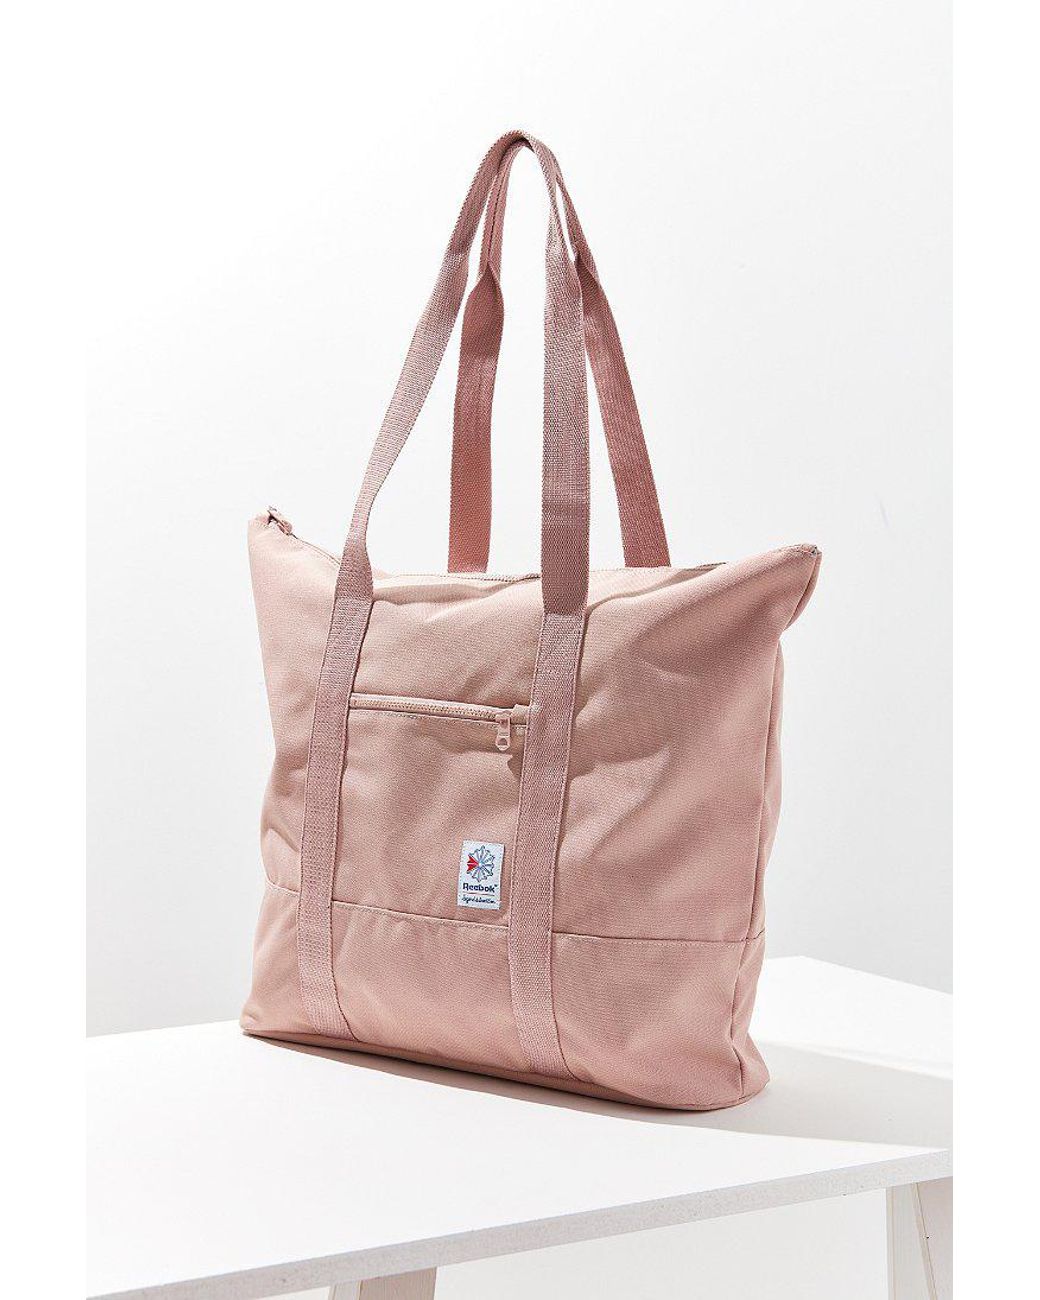 Reebok Classics Foundation Tote Bag in Pink | Lyst